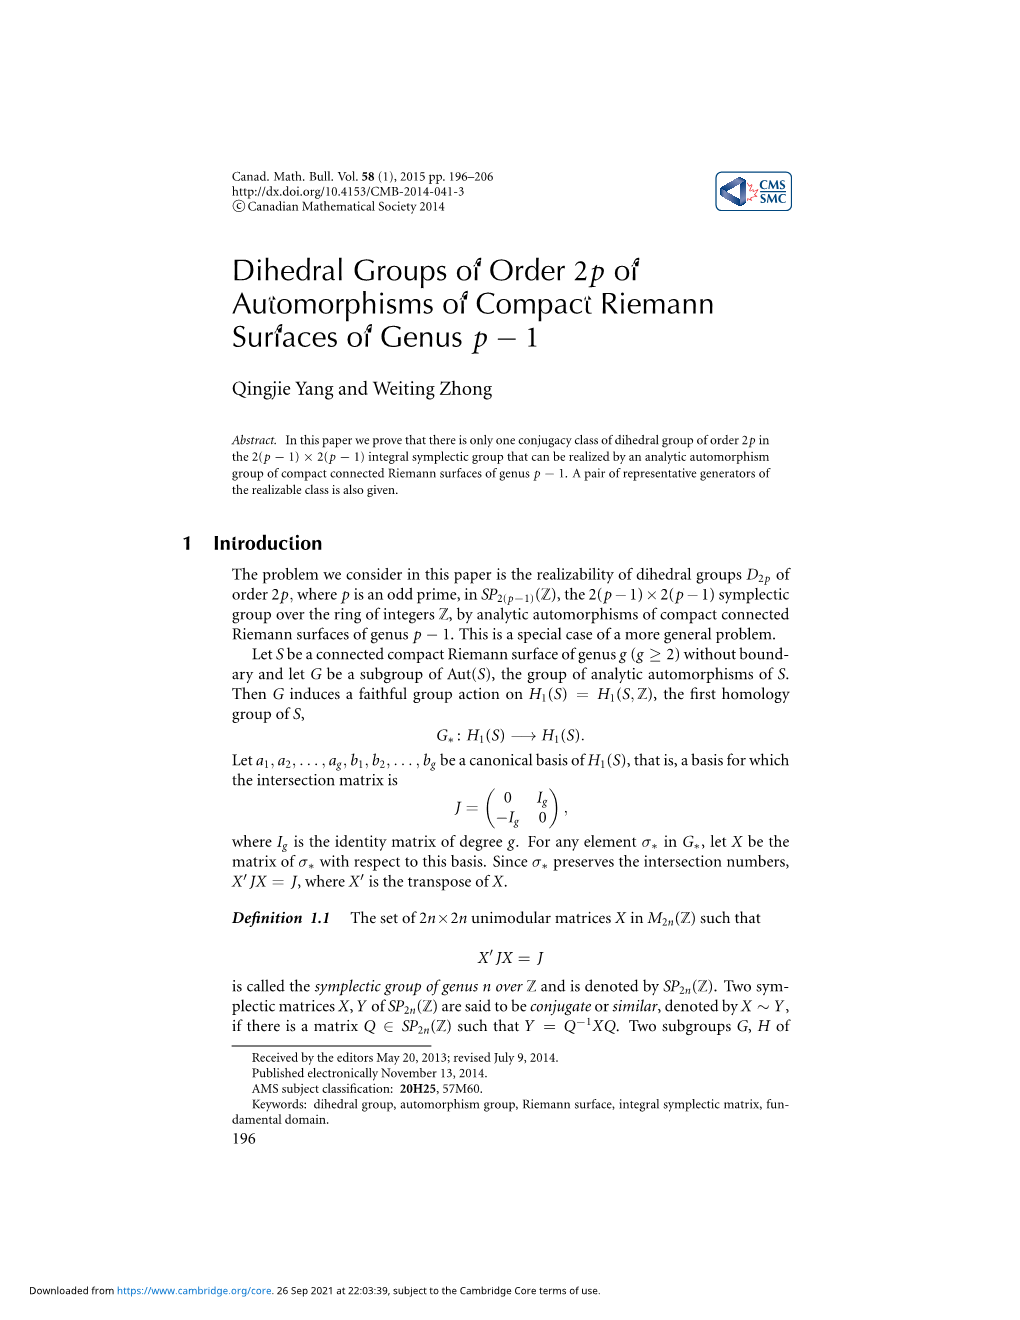 Dihedral Groups of Order 2P of Automorphisms of Compact Riemann Surfaces of Genus P − 1